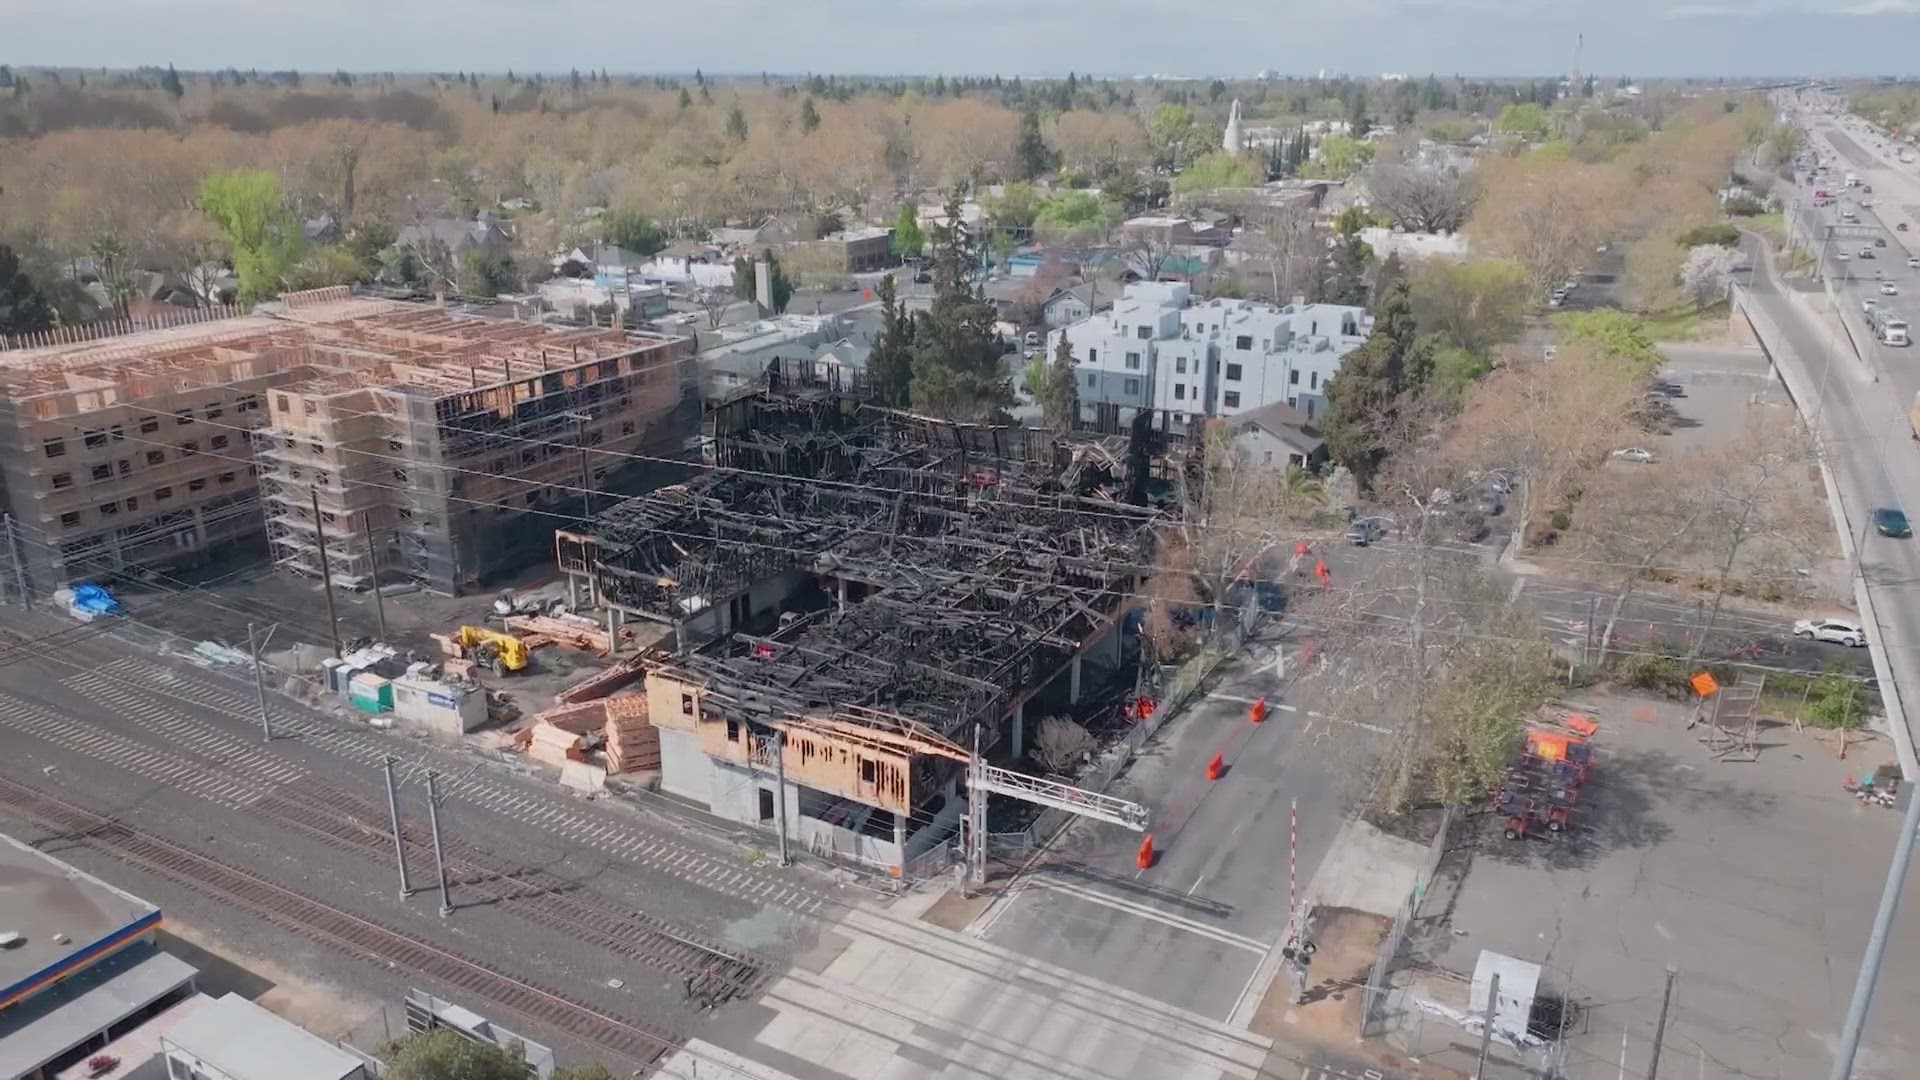 Sacramento affordable housing project destroyed in fire to be rebuilt